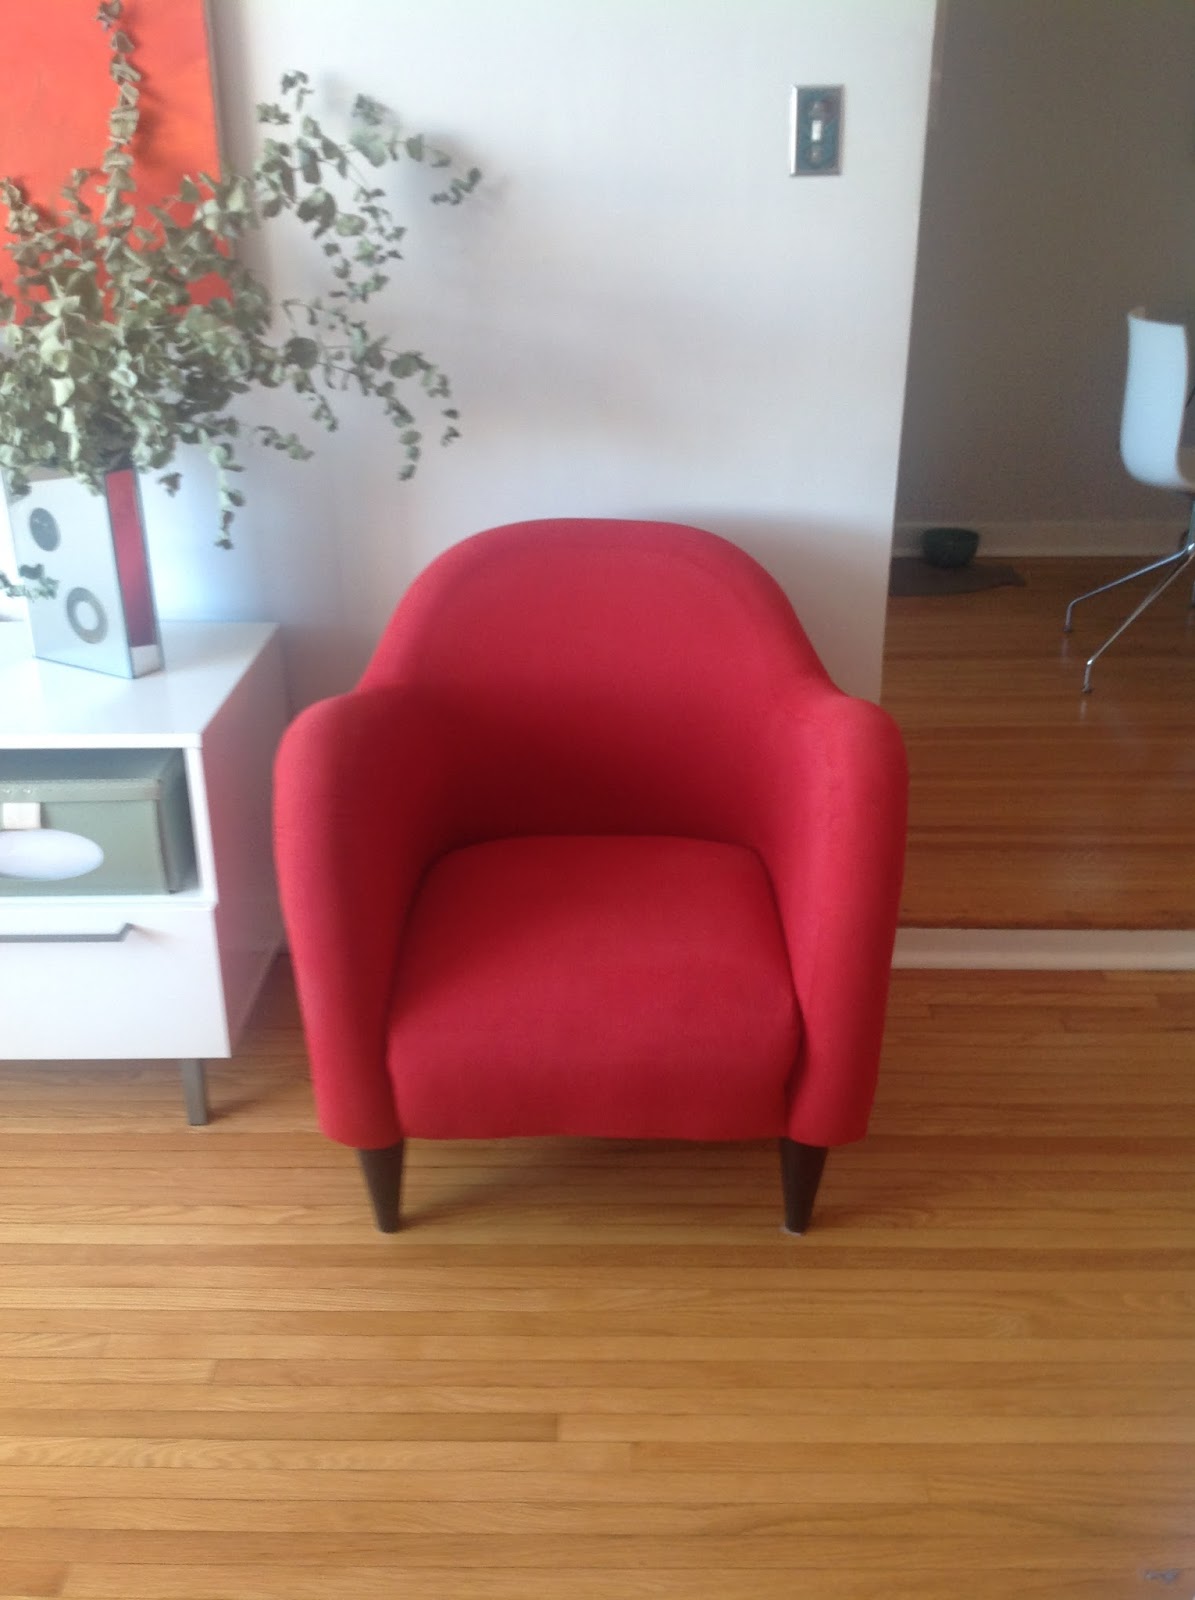 How to Change the Color of a Fabric Chair